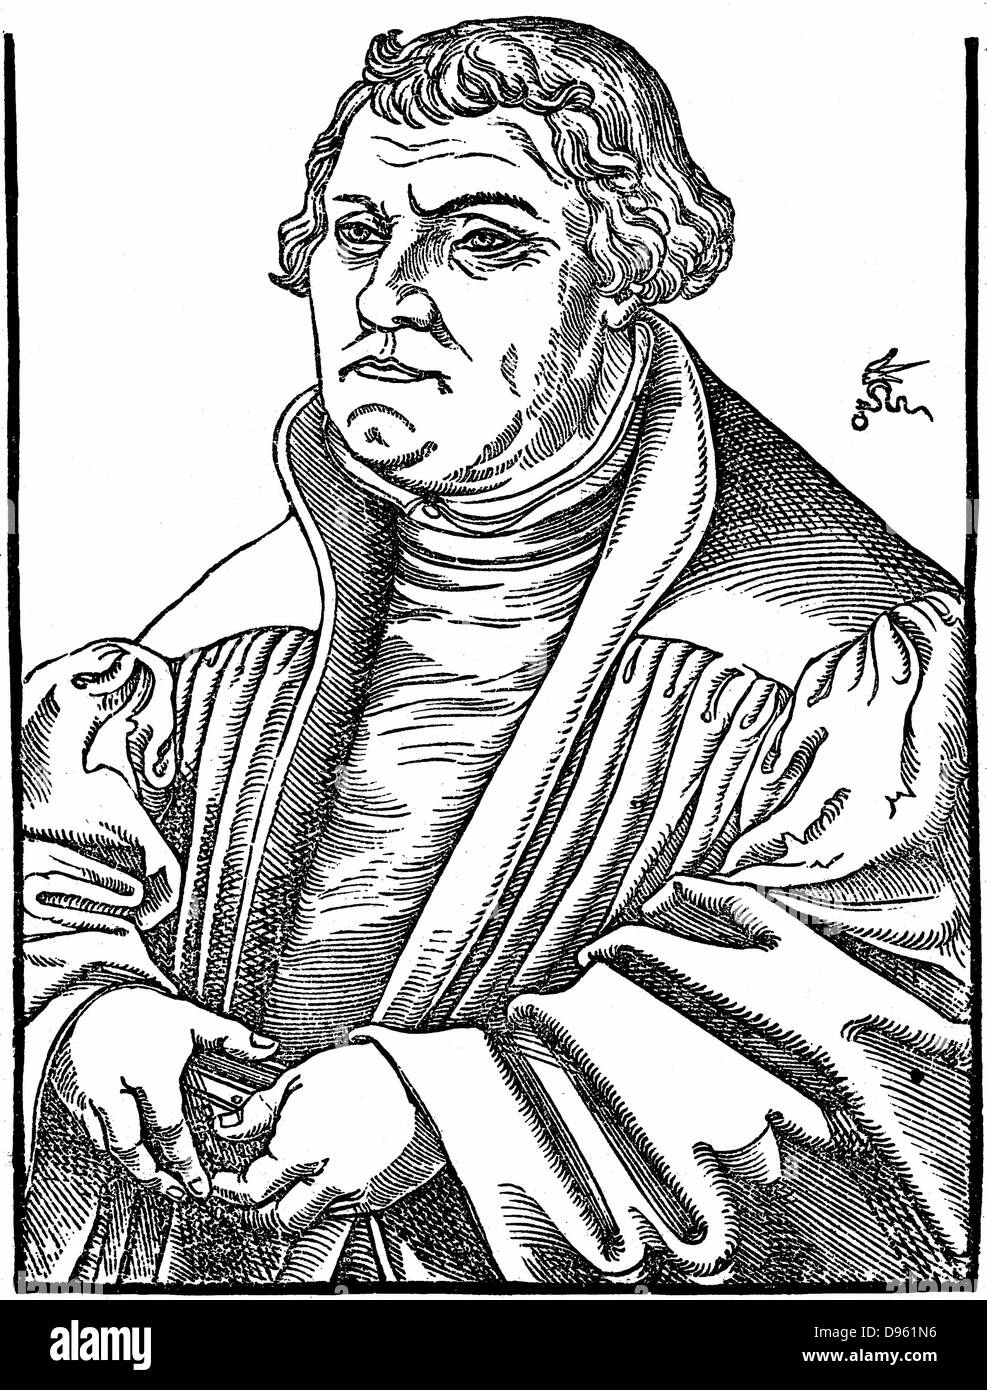 Martin Luther (1483-1546) German Protestant reformer. After woodcut by Cranach (1546). Stock Photo